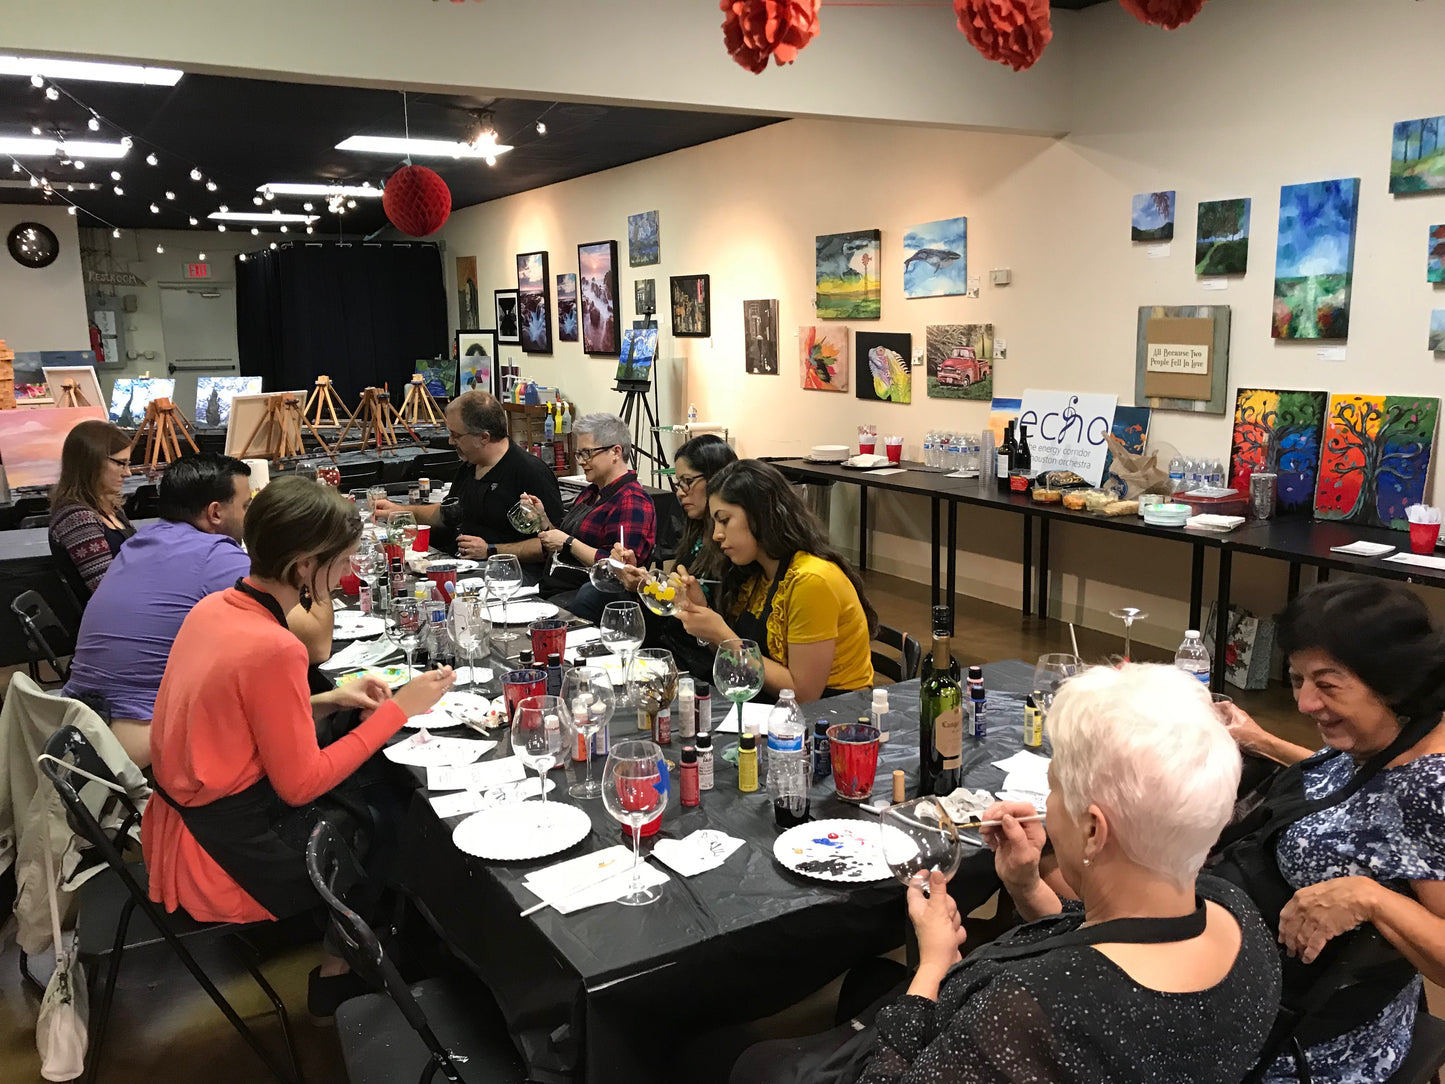 Tue, Feb 28th, 2-4P "Paint on Glass" Private Houston Corporate Painting Party